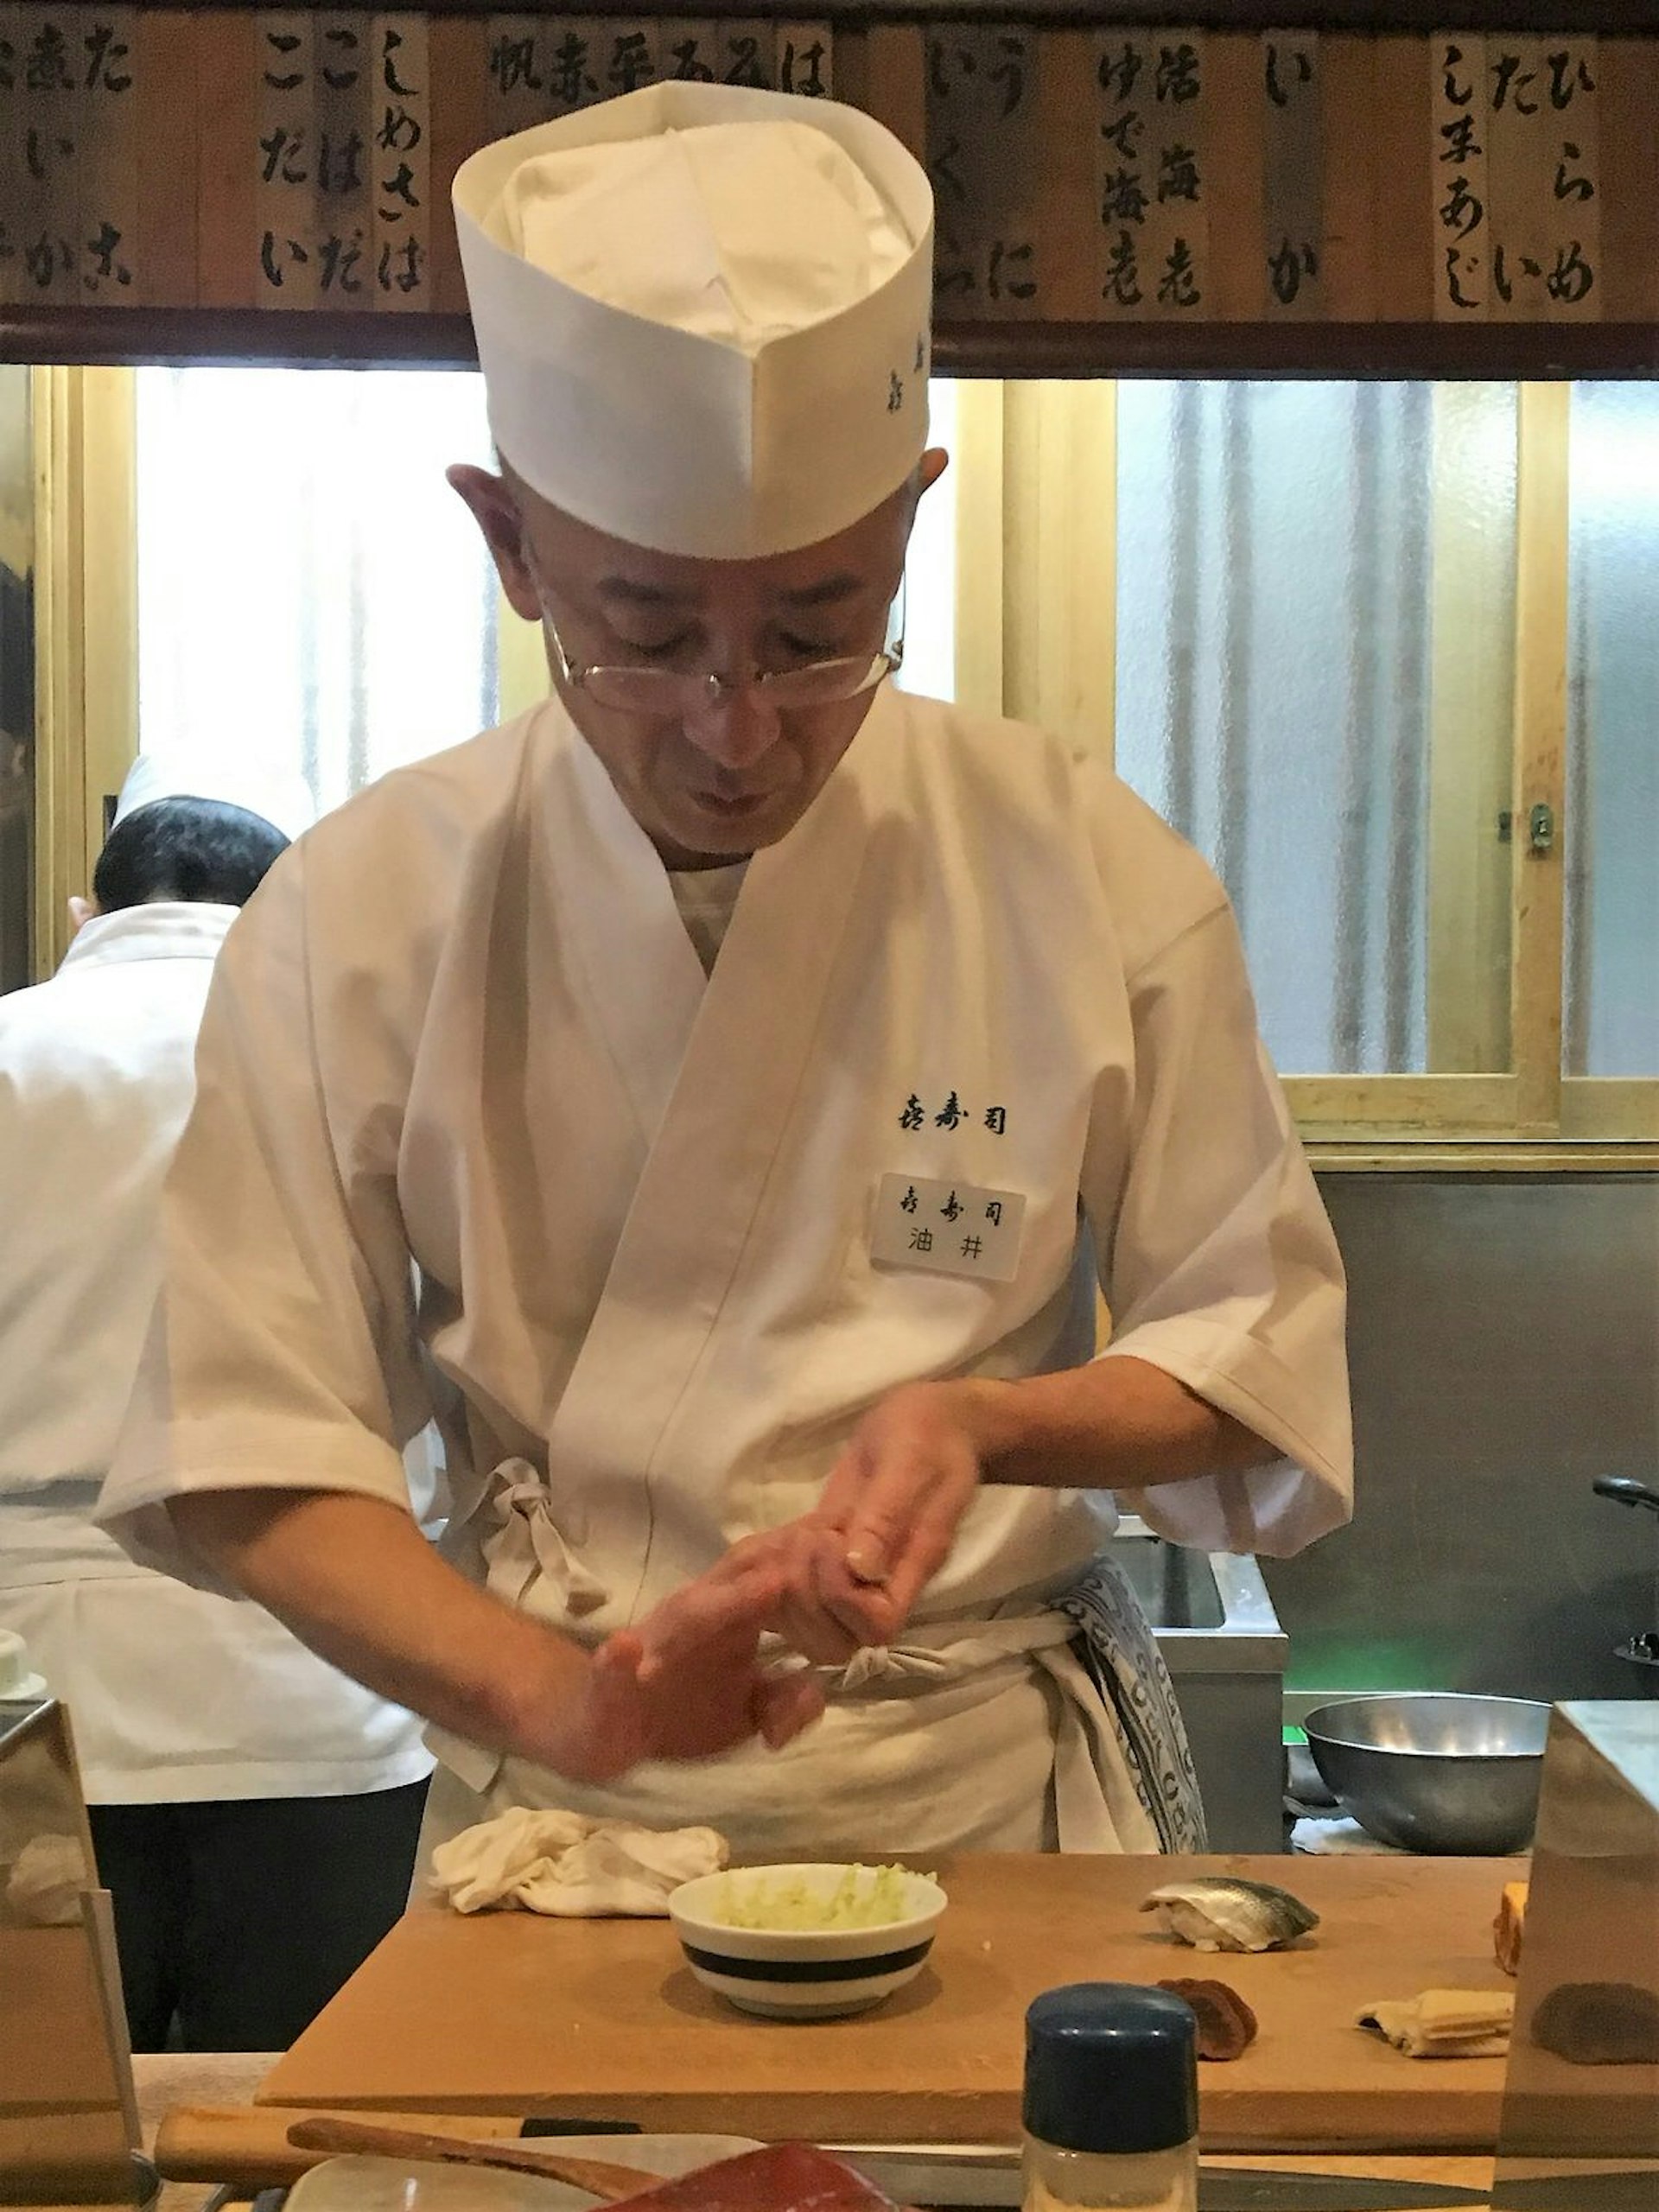 A sushi chef works behind the counter at Kizushi, using his hands to create sushi pieces